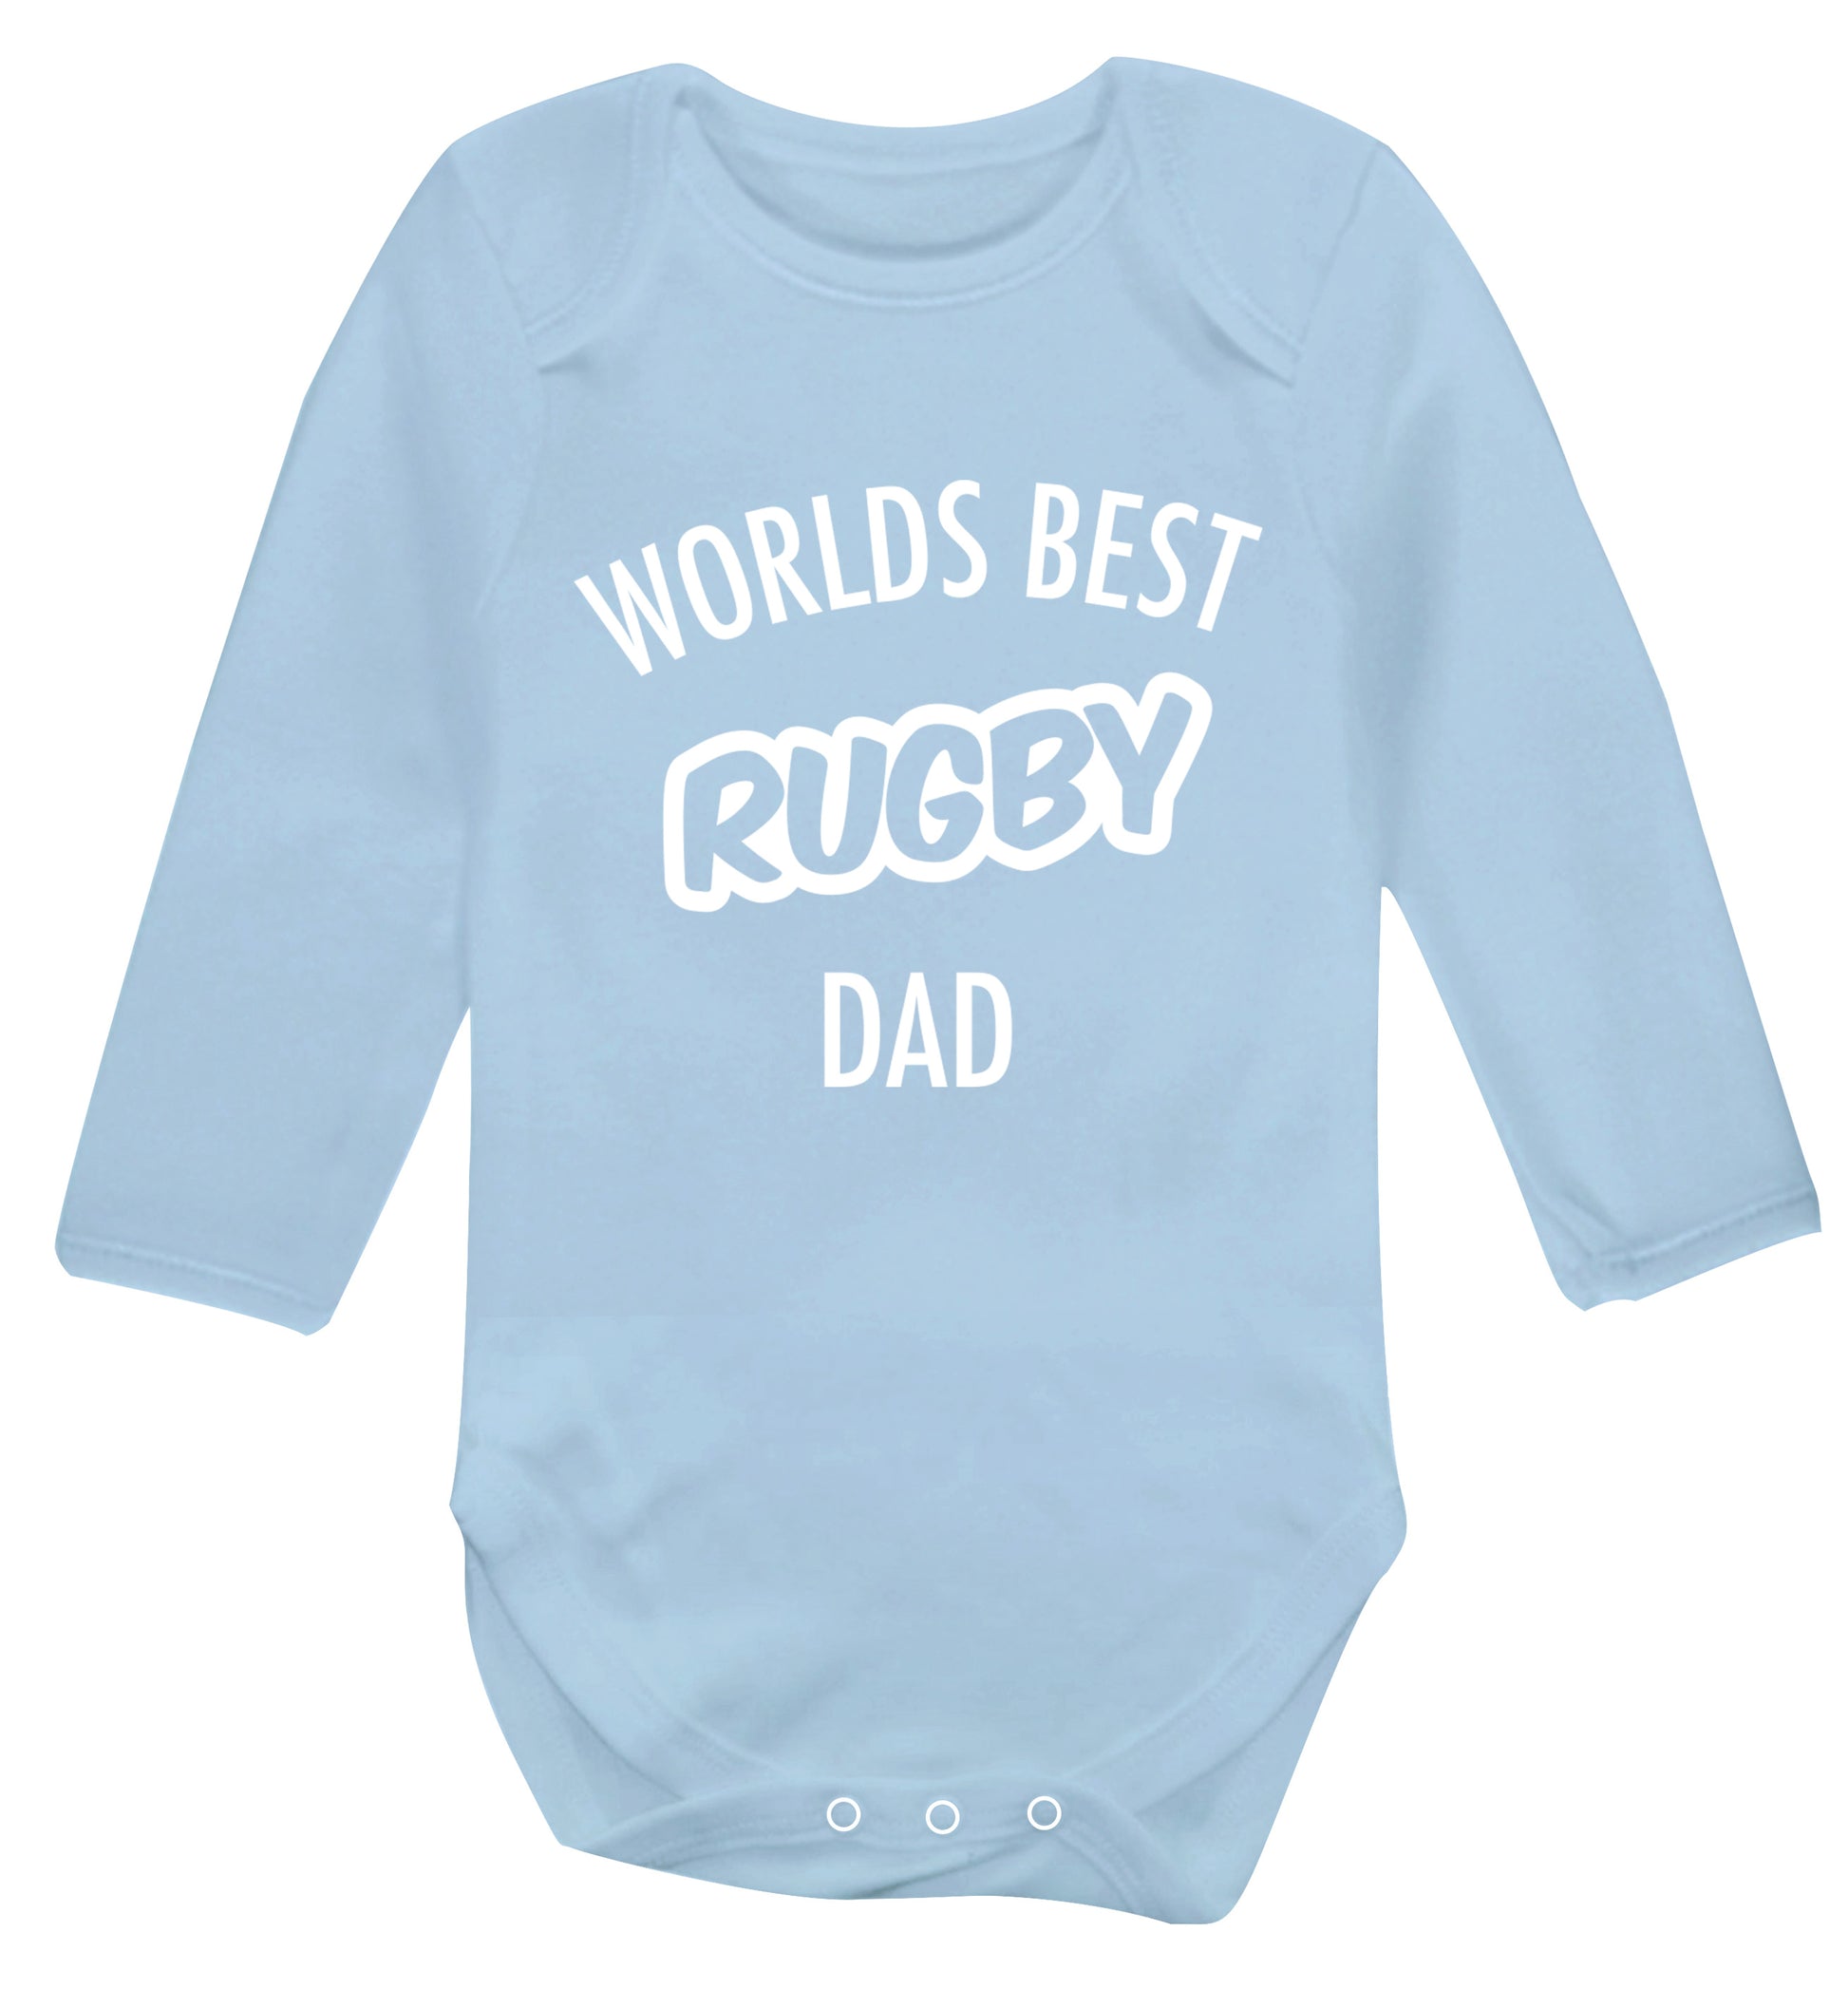 Worlds best rugby dad Baby Vest long sleeved pale blue 6-12 months